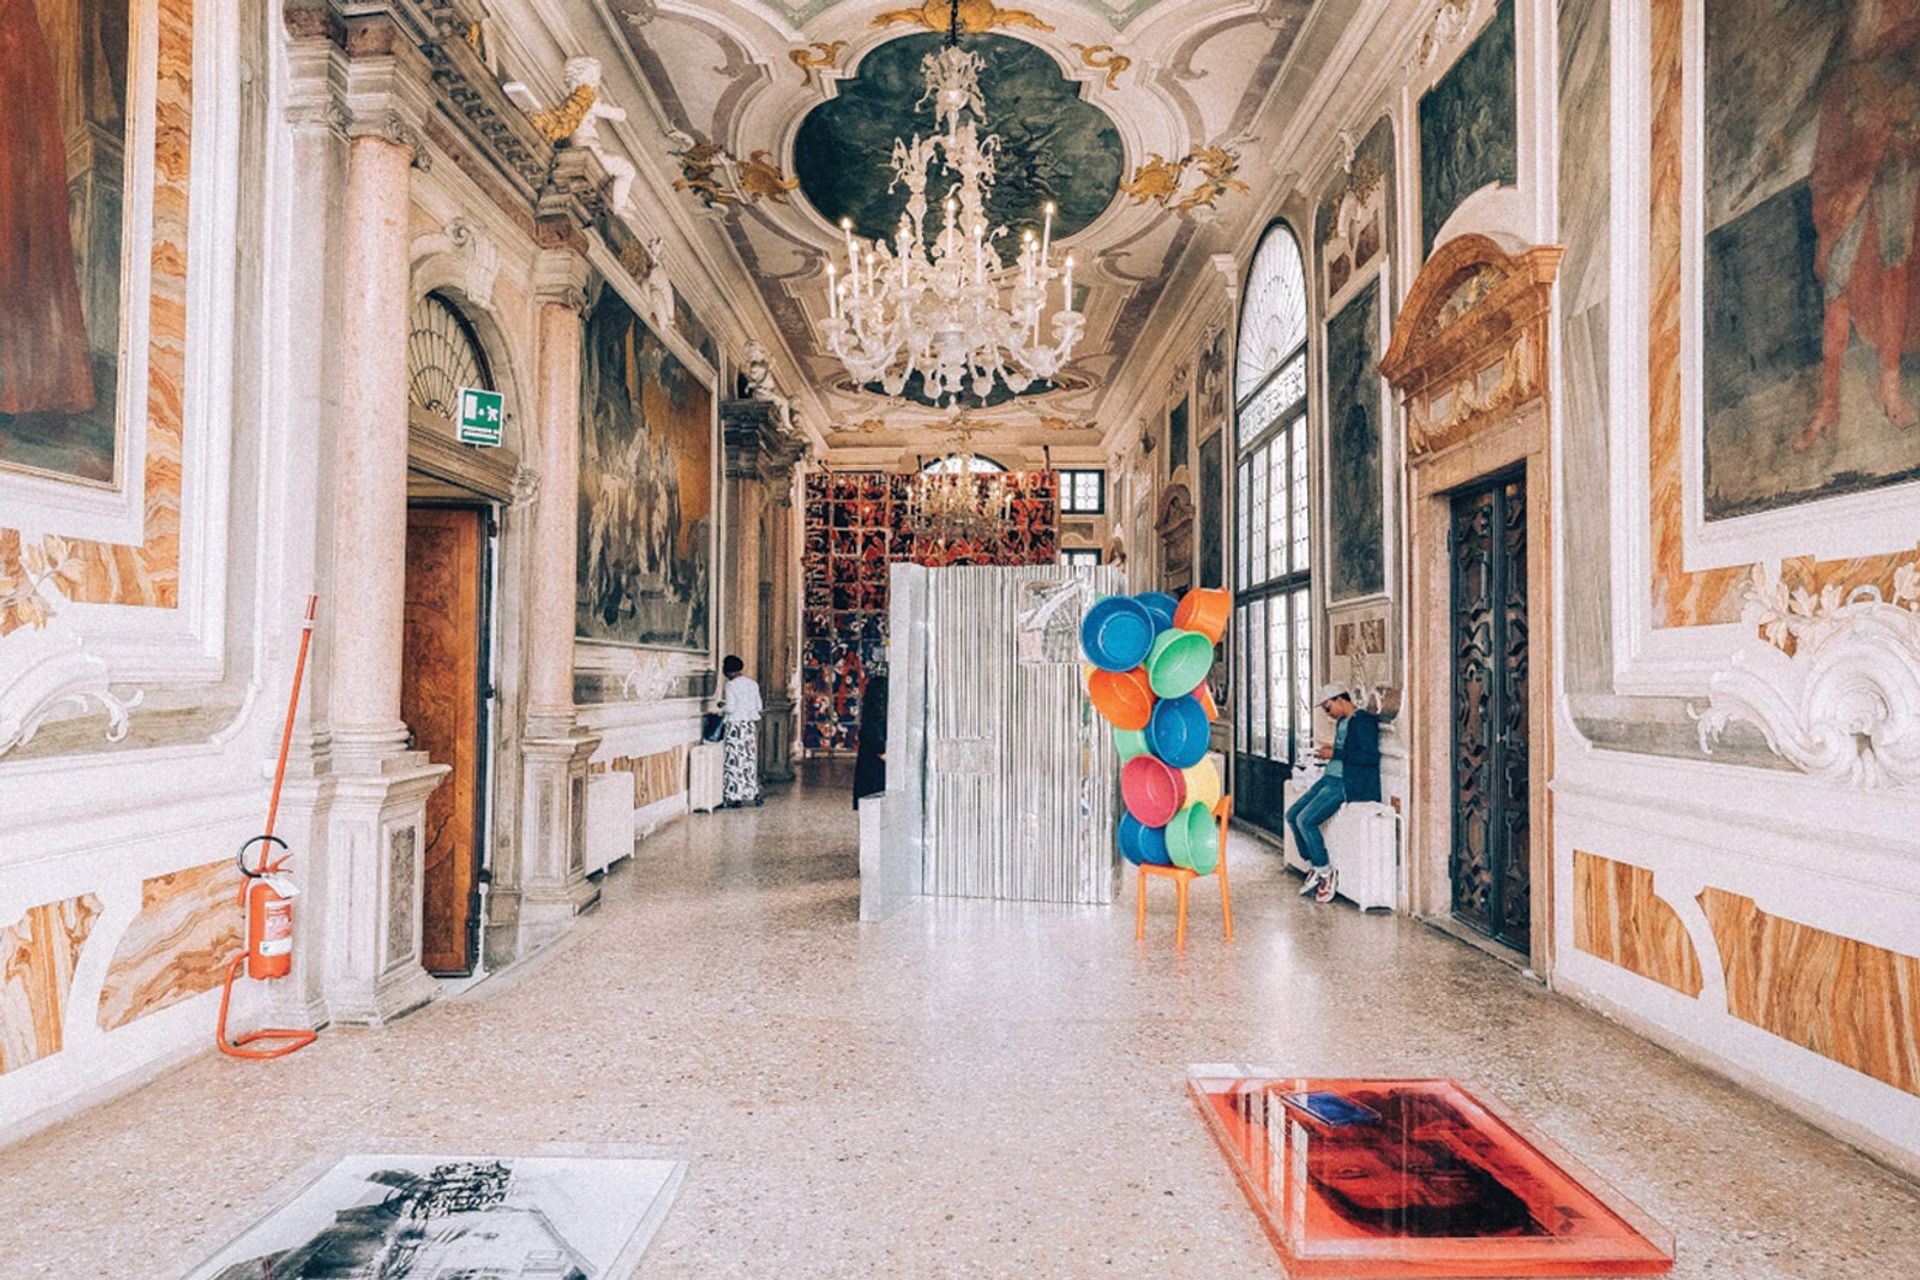 Exhibitions in private residences such as Palazzo Pisani, which hosted Angola’s 2015 Venice Biennale pavilion, may no longer be possible under Venice’s new “exhibition-blocking” edict  which holds that shows cannot run for the entirety of the Biennale Courtesy of Venice Biennale